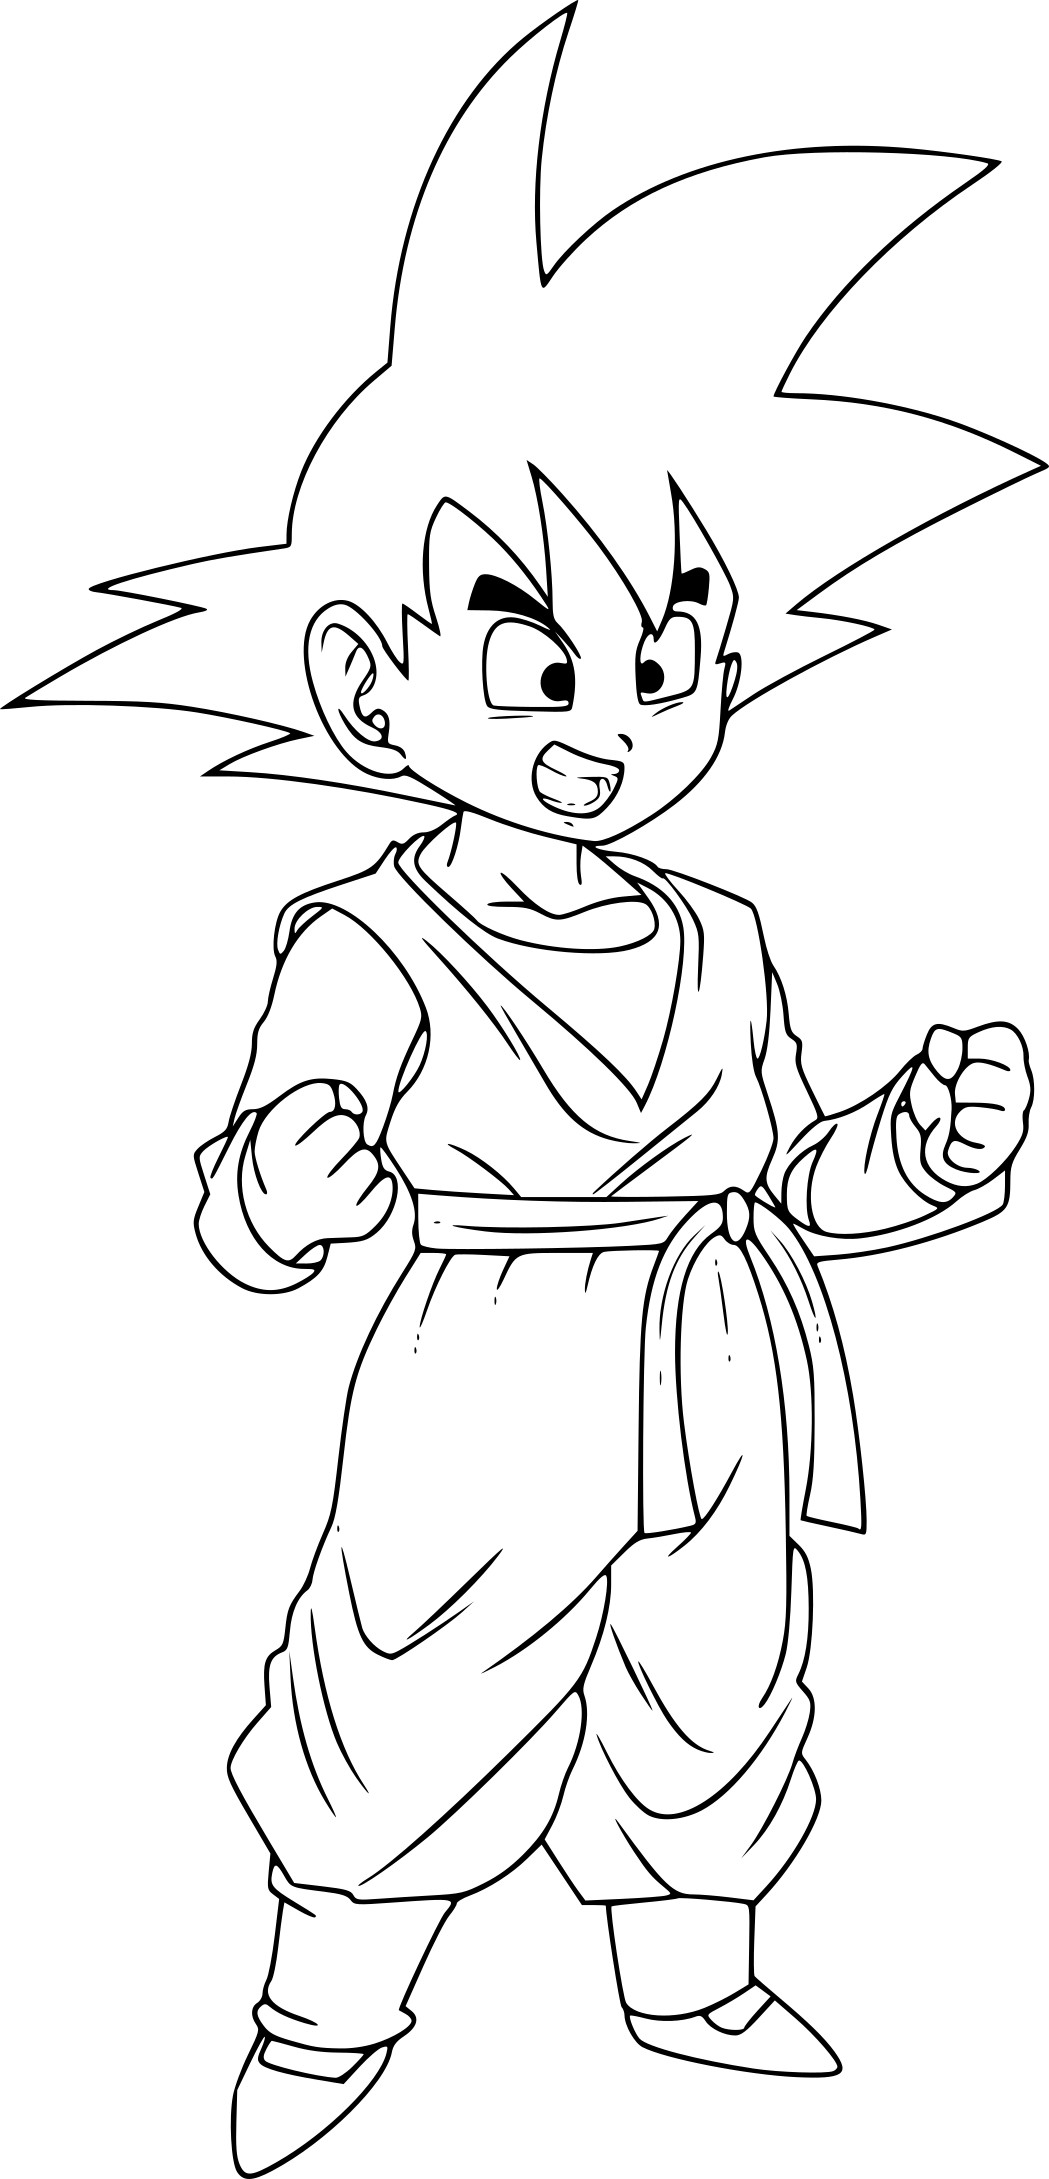 Son Goten drawing and coloring page